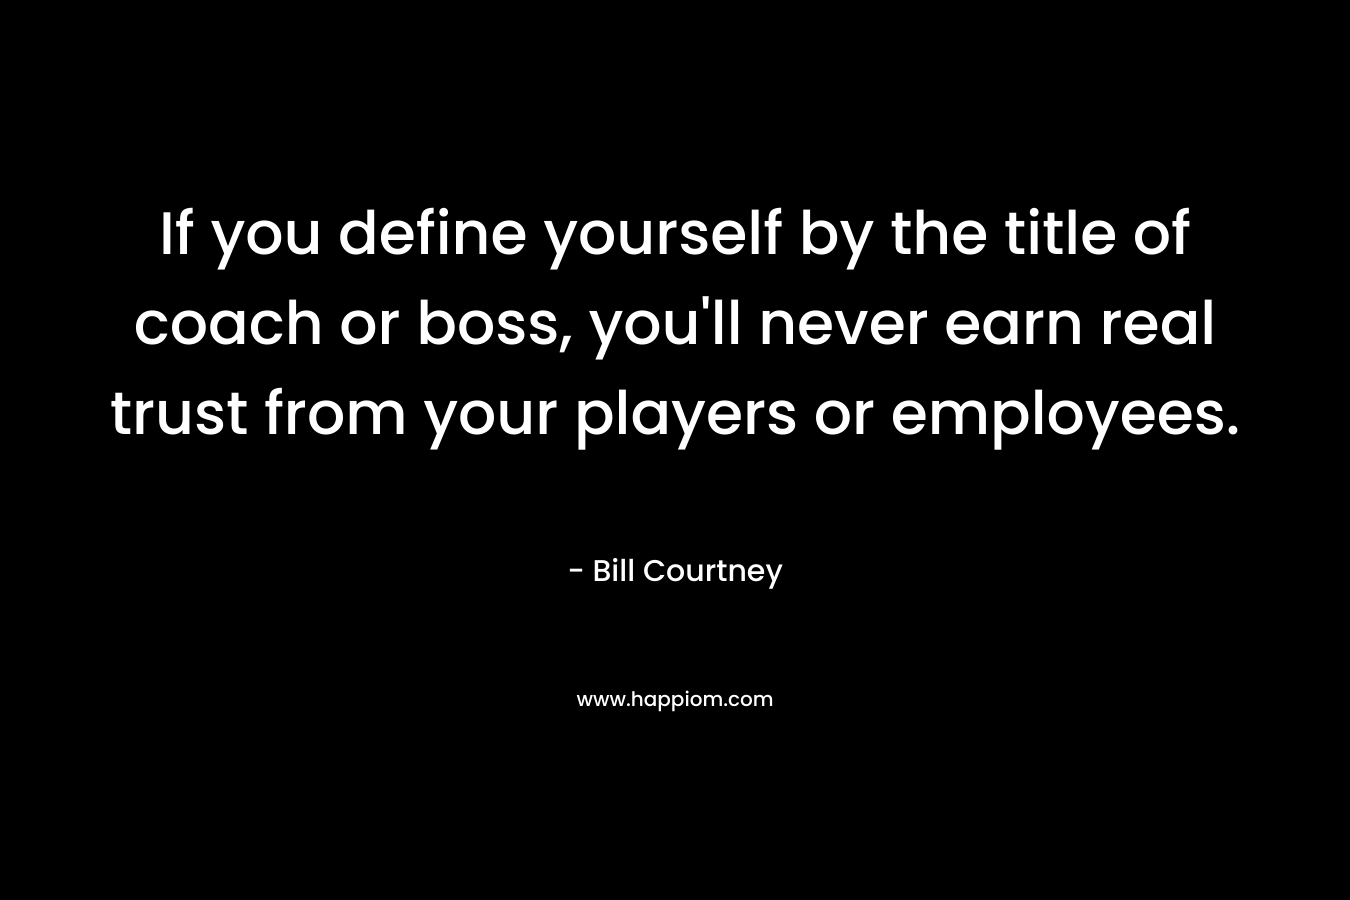 If you define yourself by the title of coach or boss, you’ll never earn real trust from your players or employees. – Bill Courtney